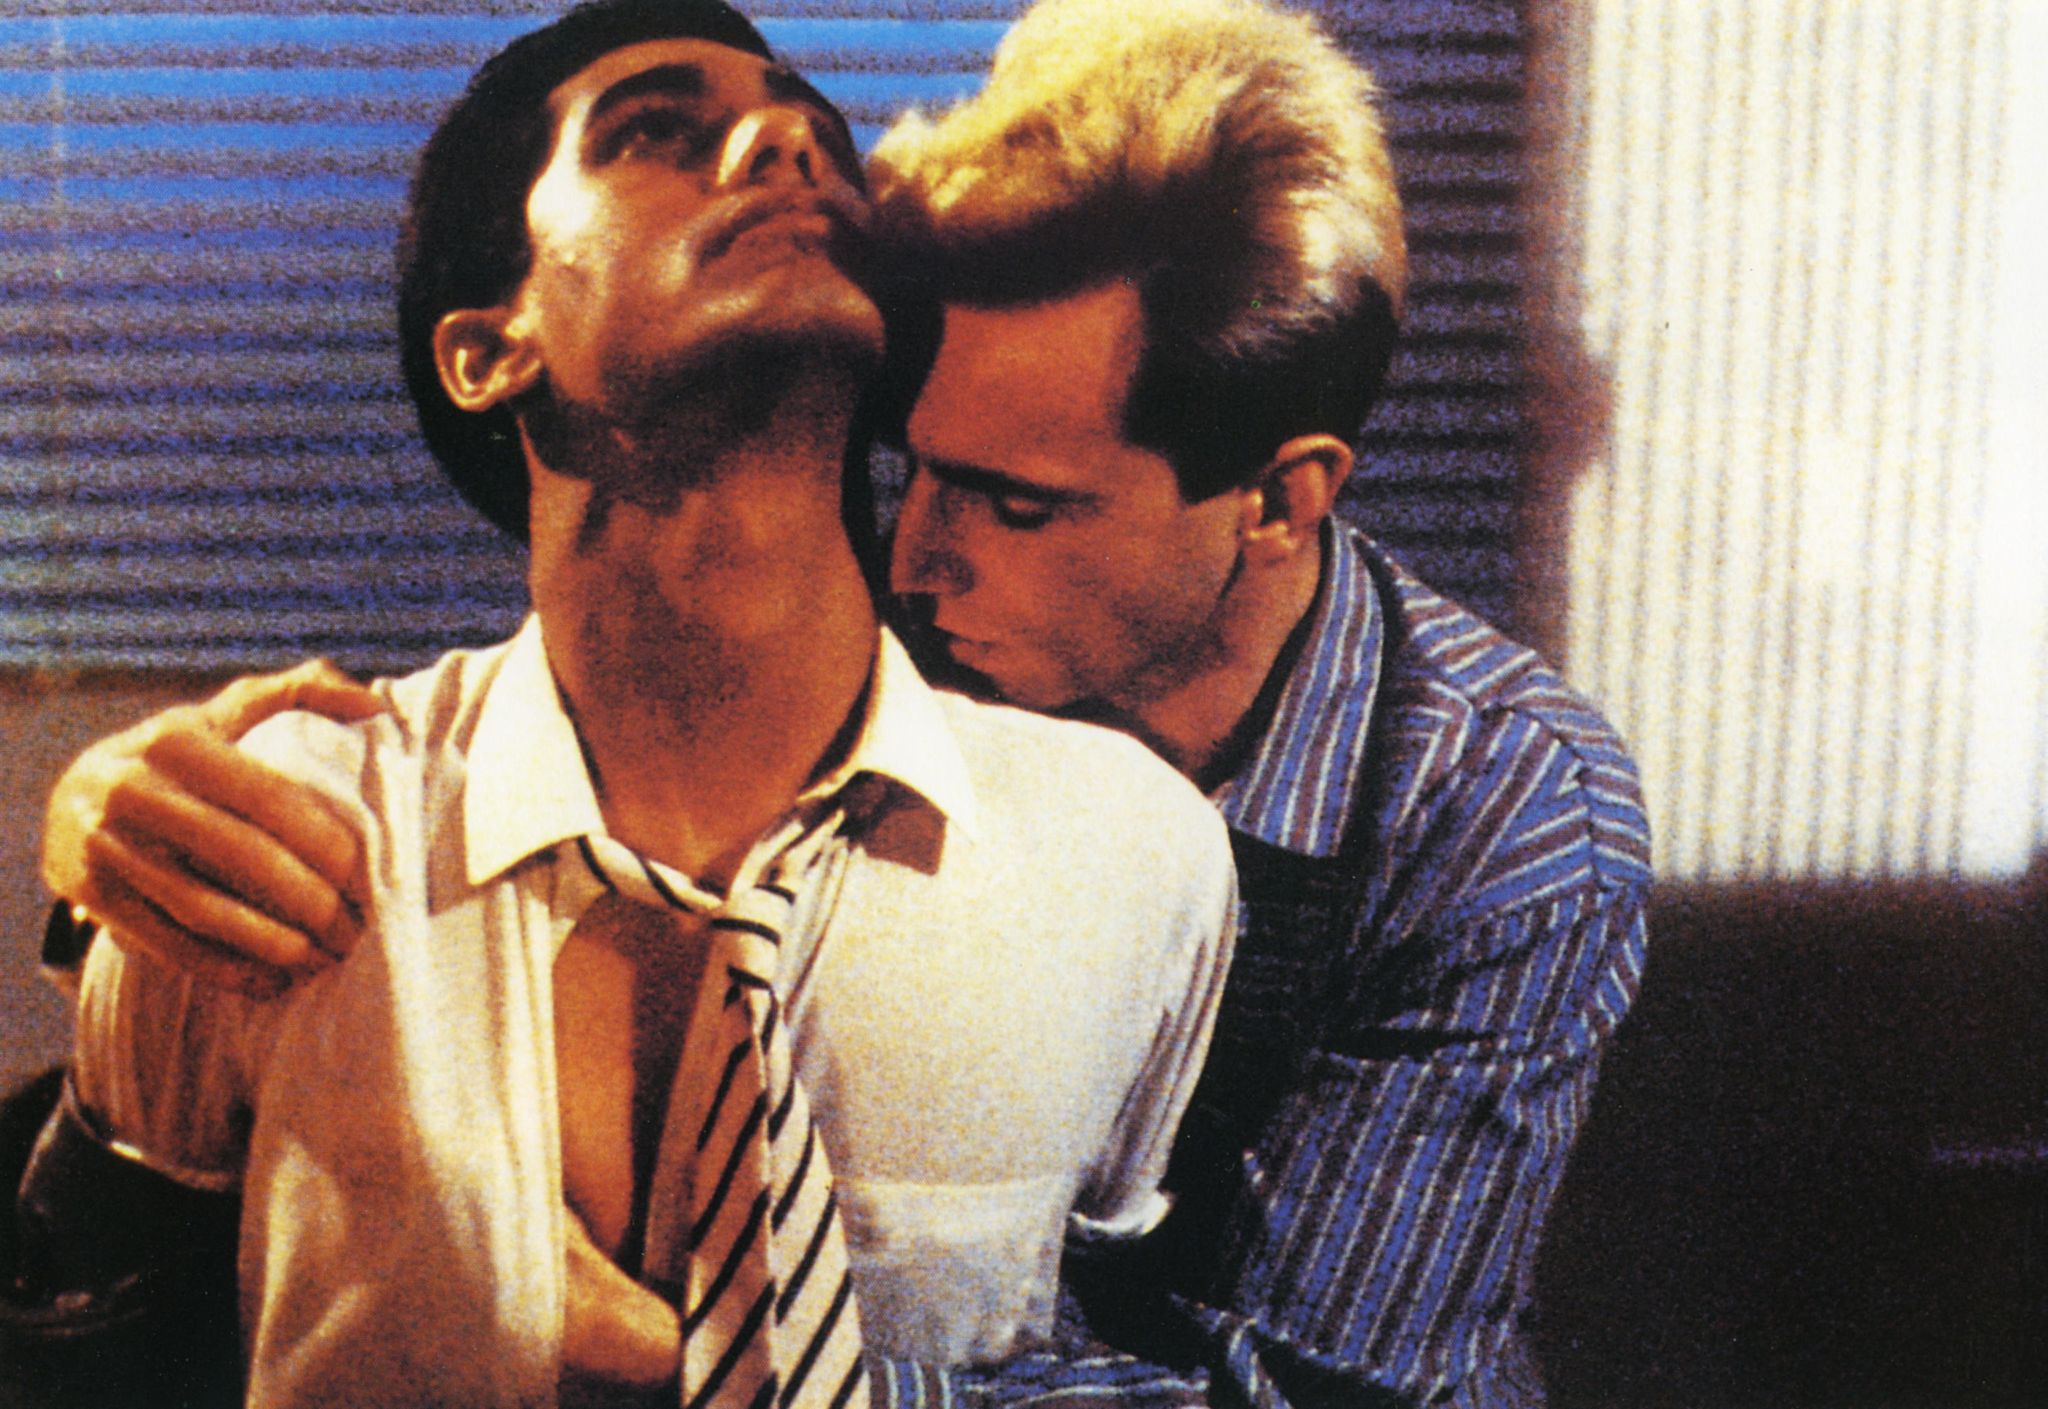 egrn8h my beautiful laundrette 1985 working title film with gordon warnecke at left and daniel day lewis image shot 1985 exact date unknown